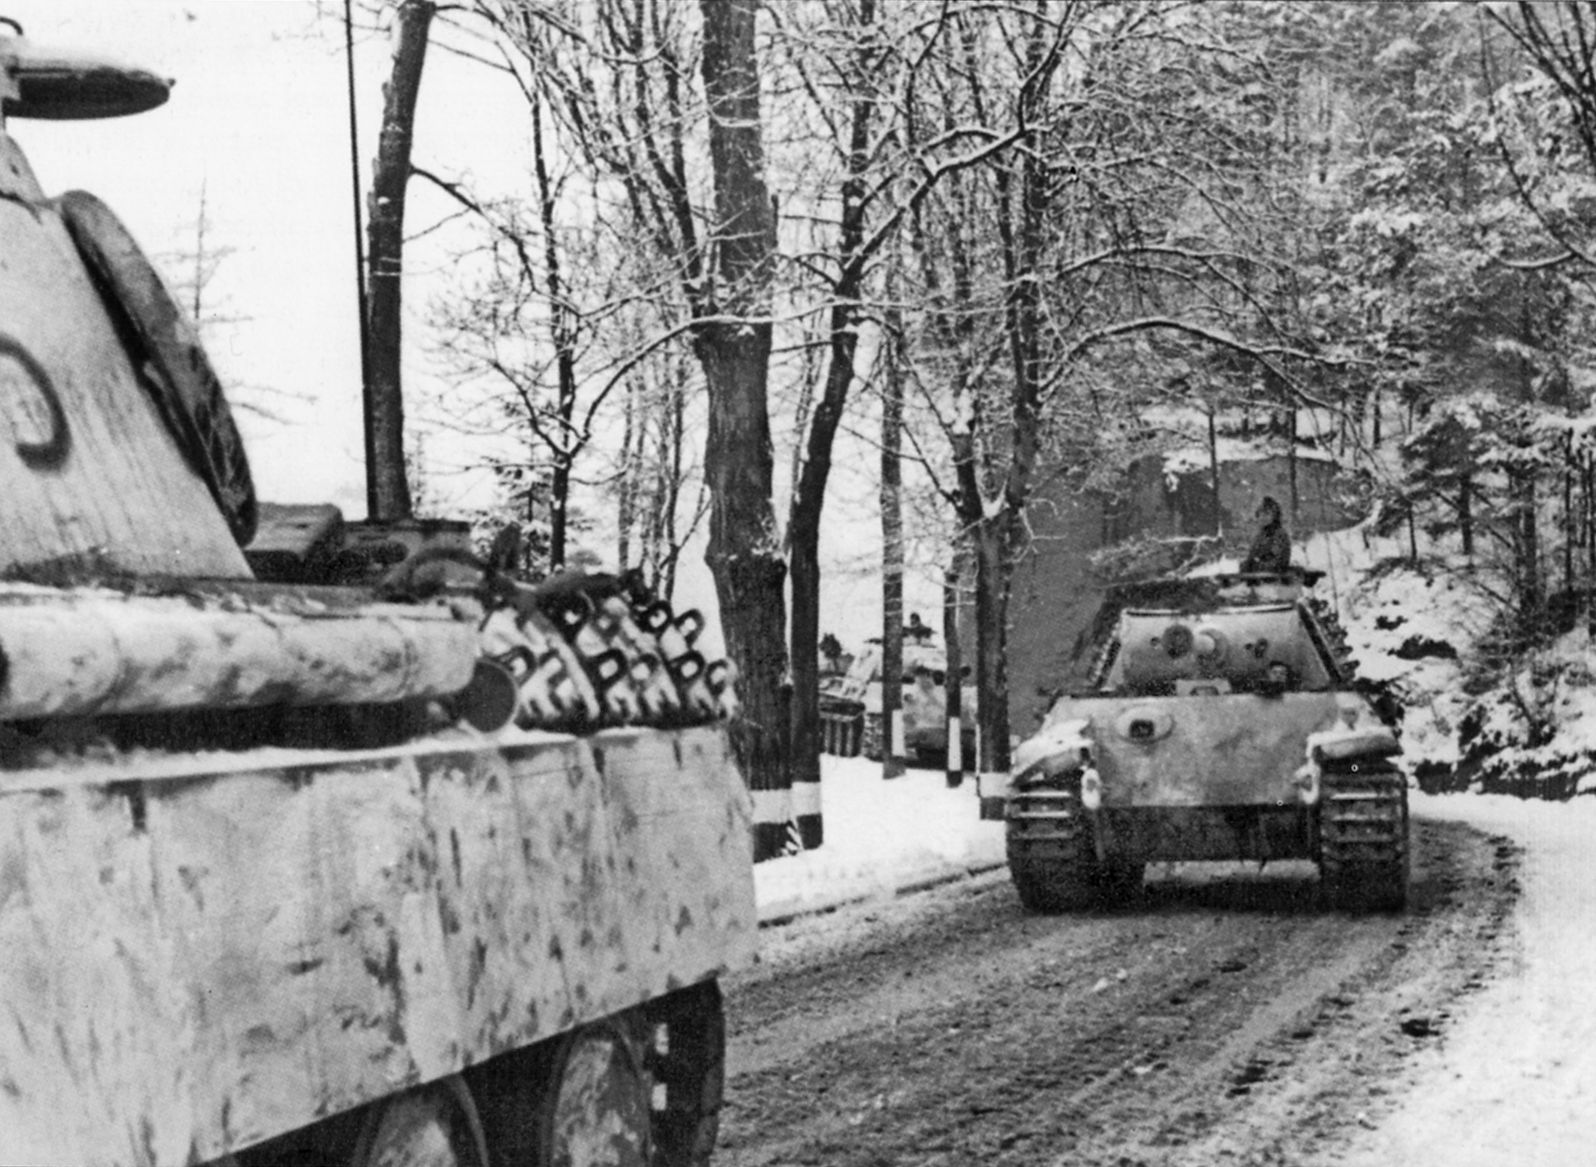 German Panther tanks roll along an unpaved road that has been hardened by freezing winter temperatures during the Battle of the Bulge